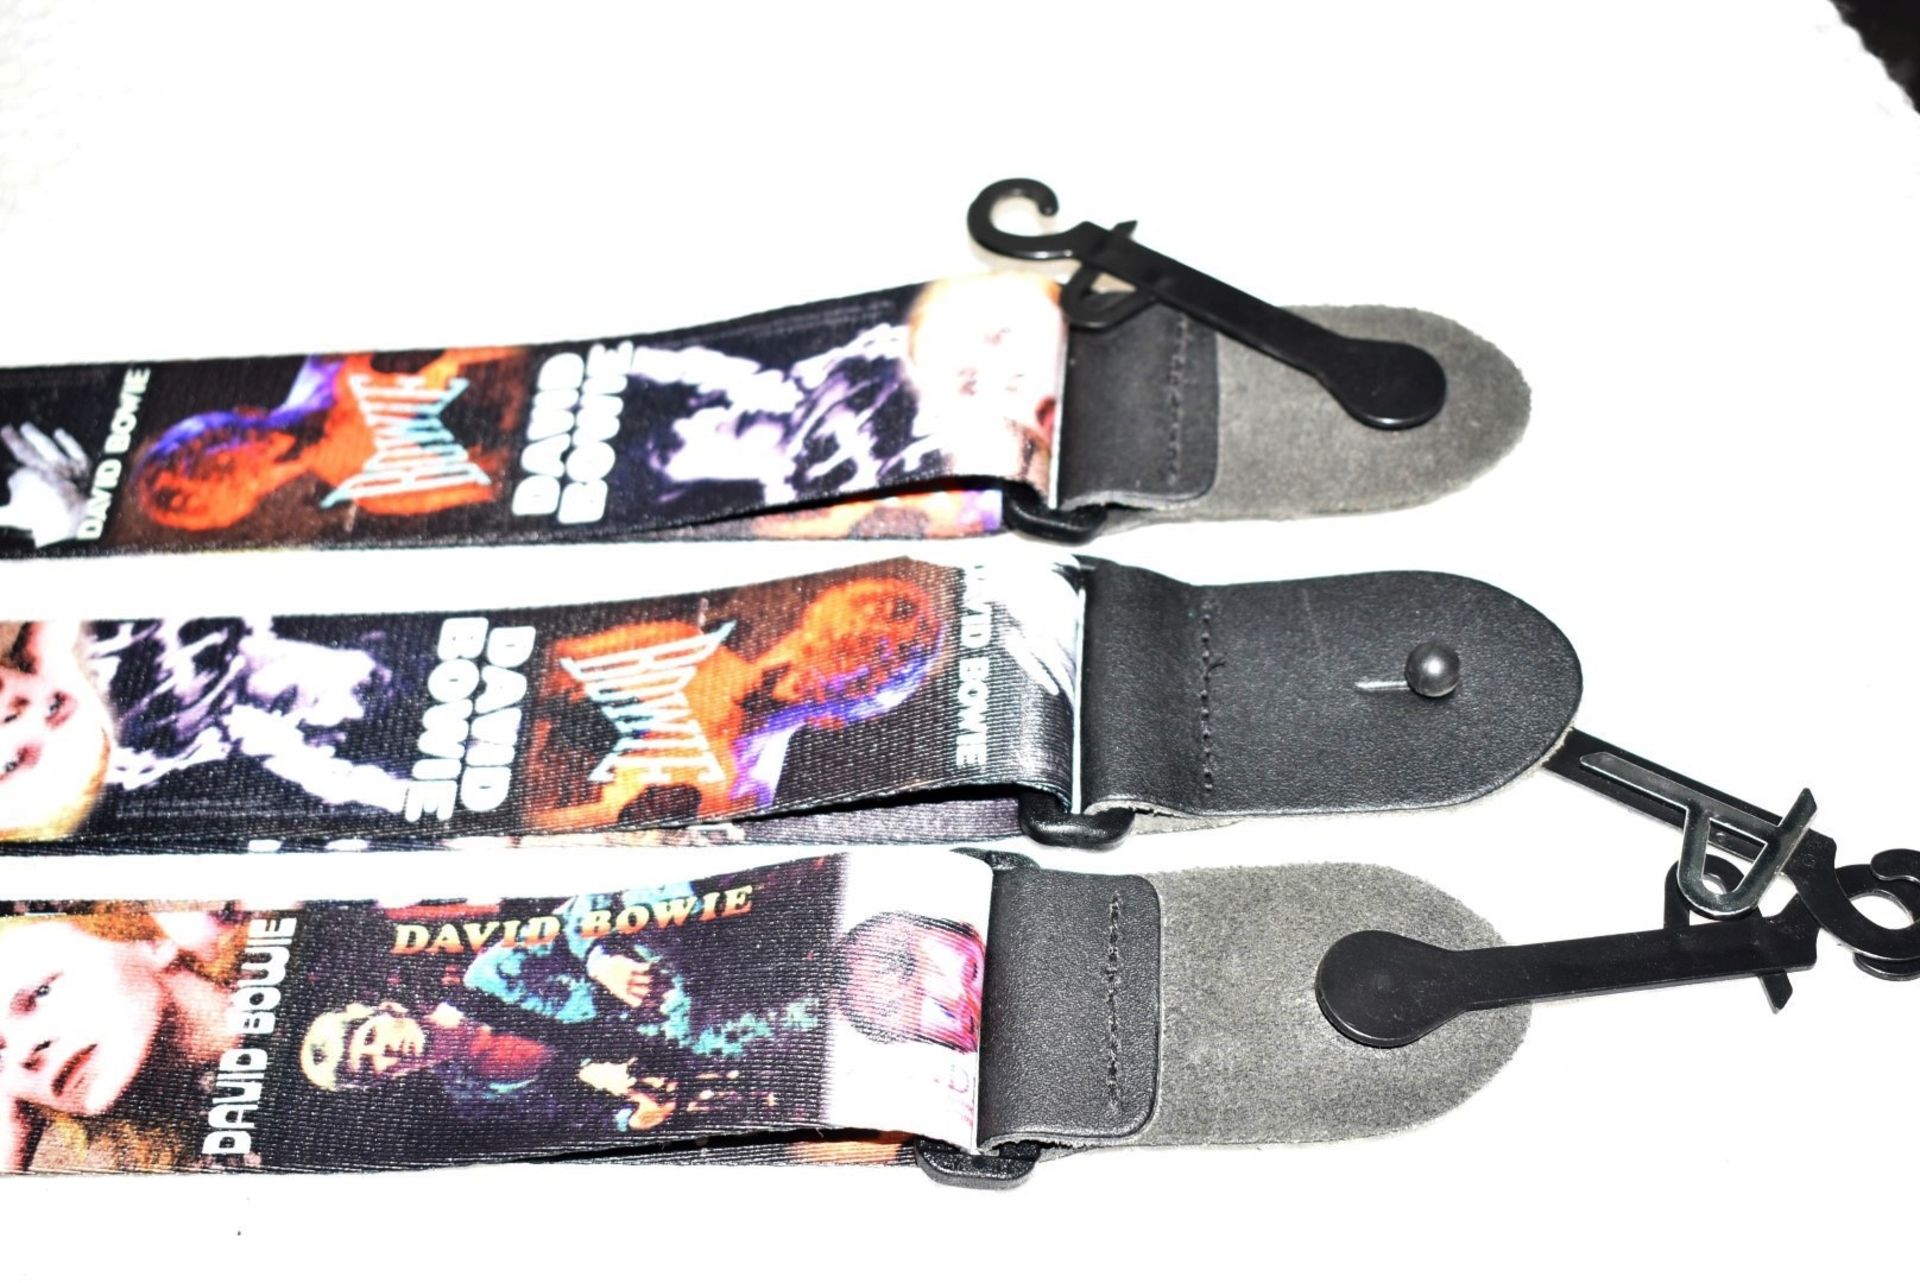 3 x David Bowie Guitar Straps by Perri's - Officially Licensed Merchandise - RRP £90 - New & Unused - Image 7 of 8